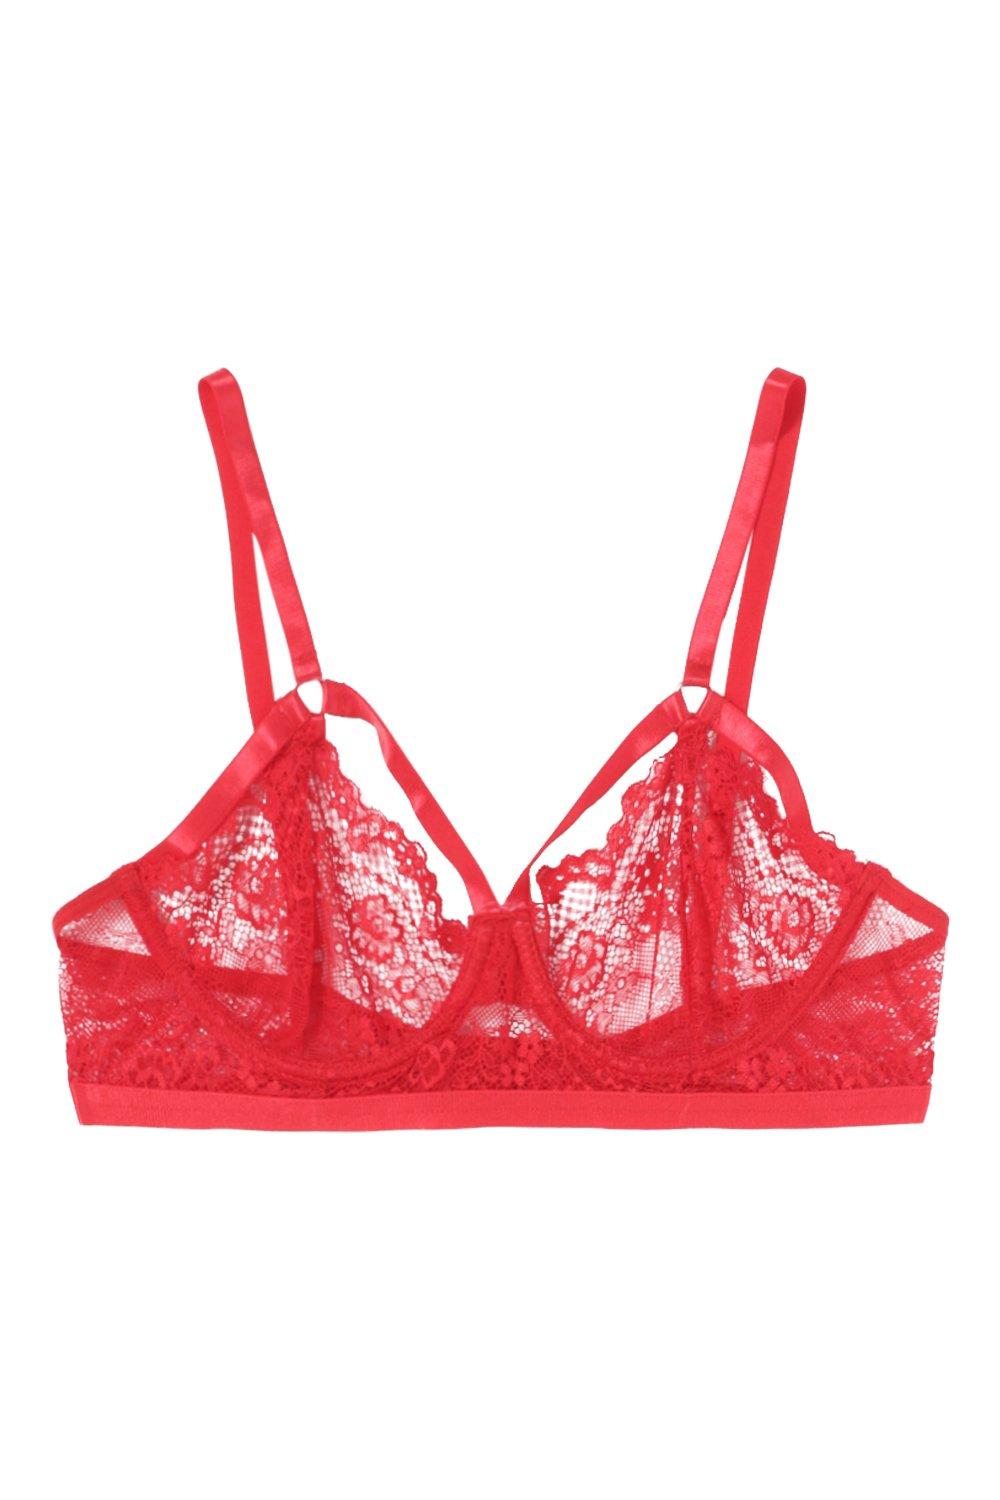 https://media.boohoo.com/i/boohoo/lzz87561_red_xl_4/female-red-lace-strapping-underwire-bra